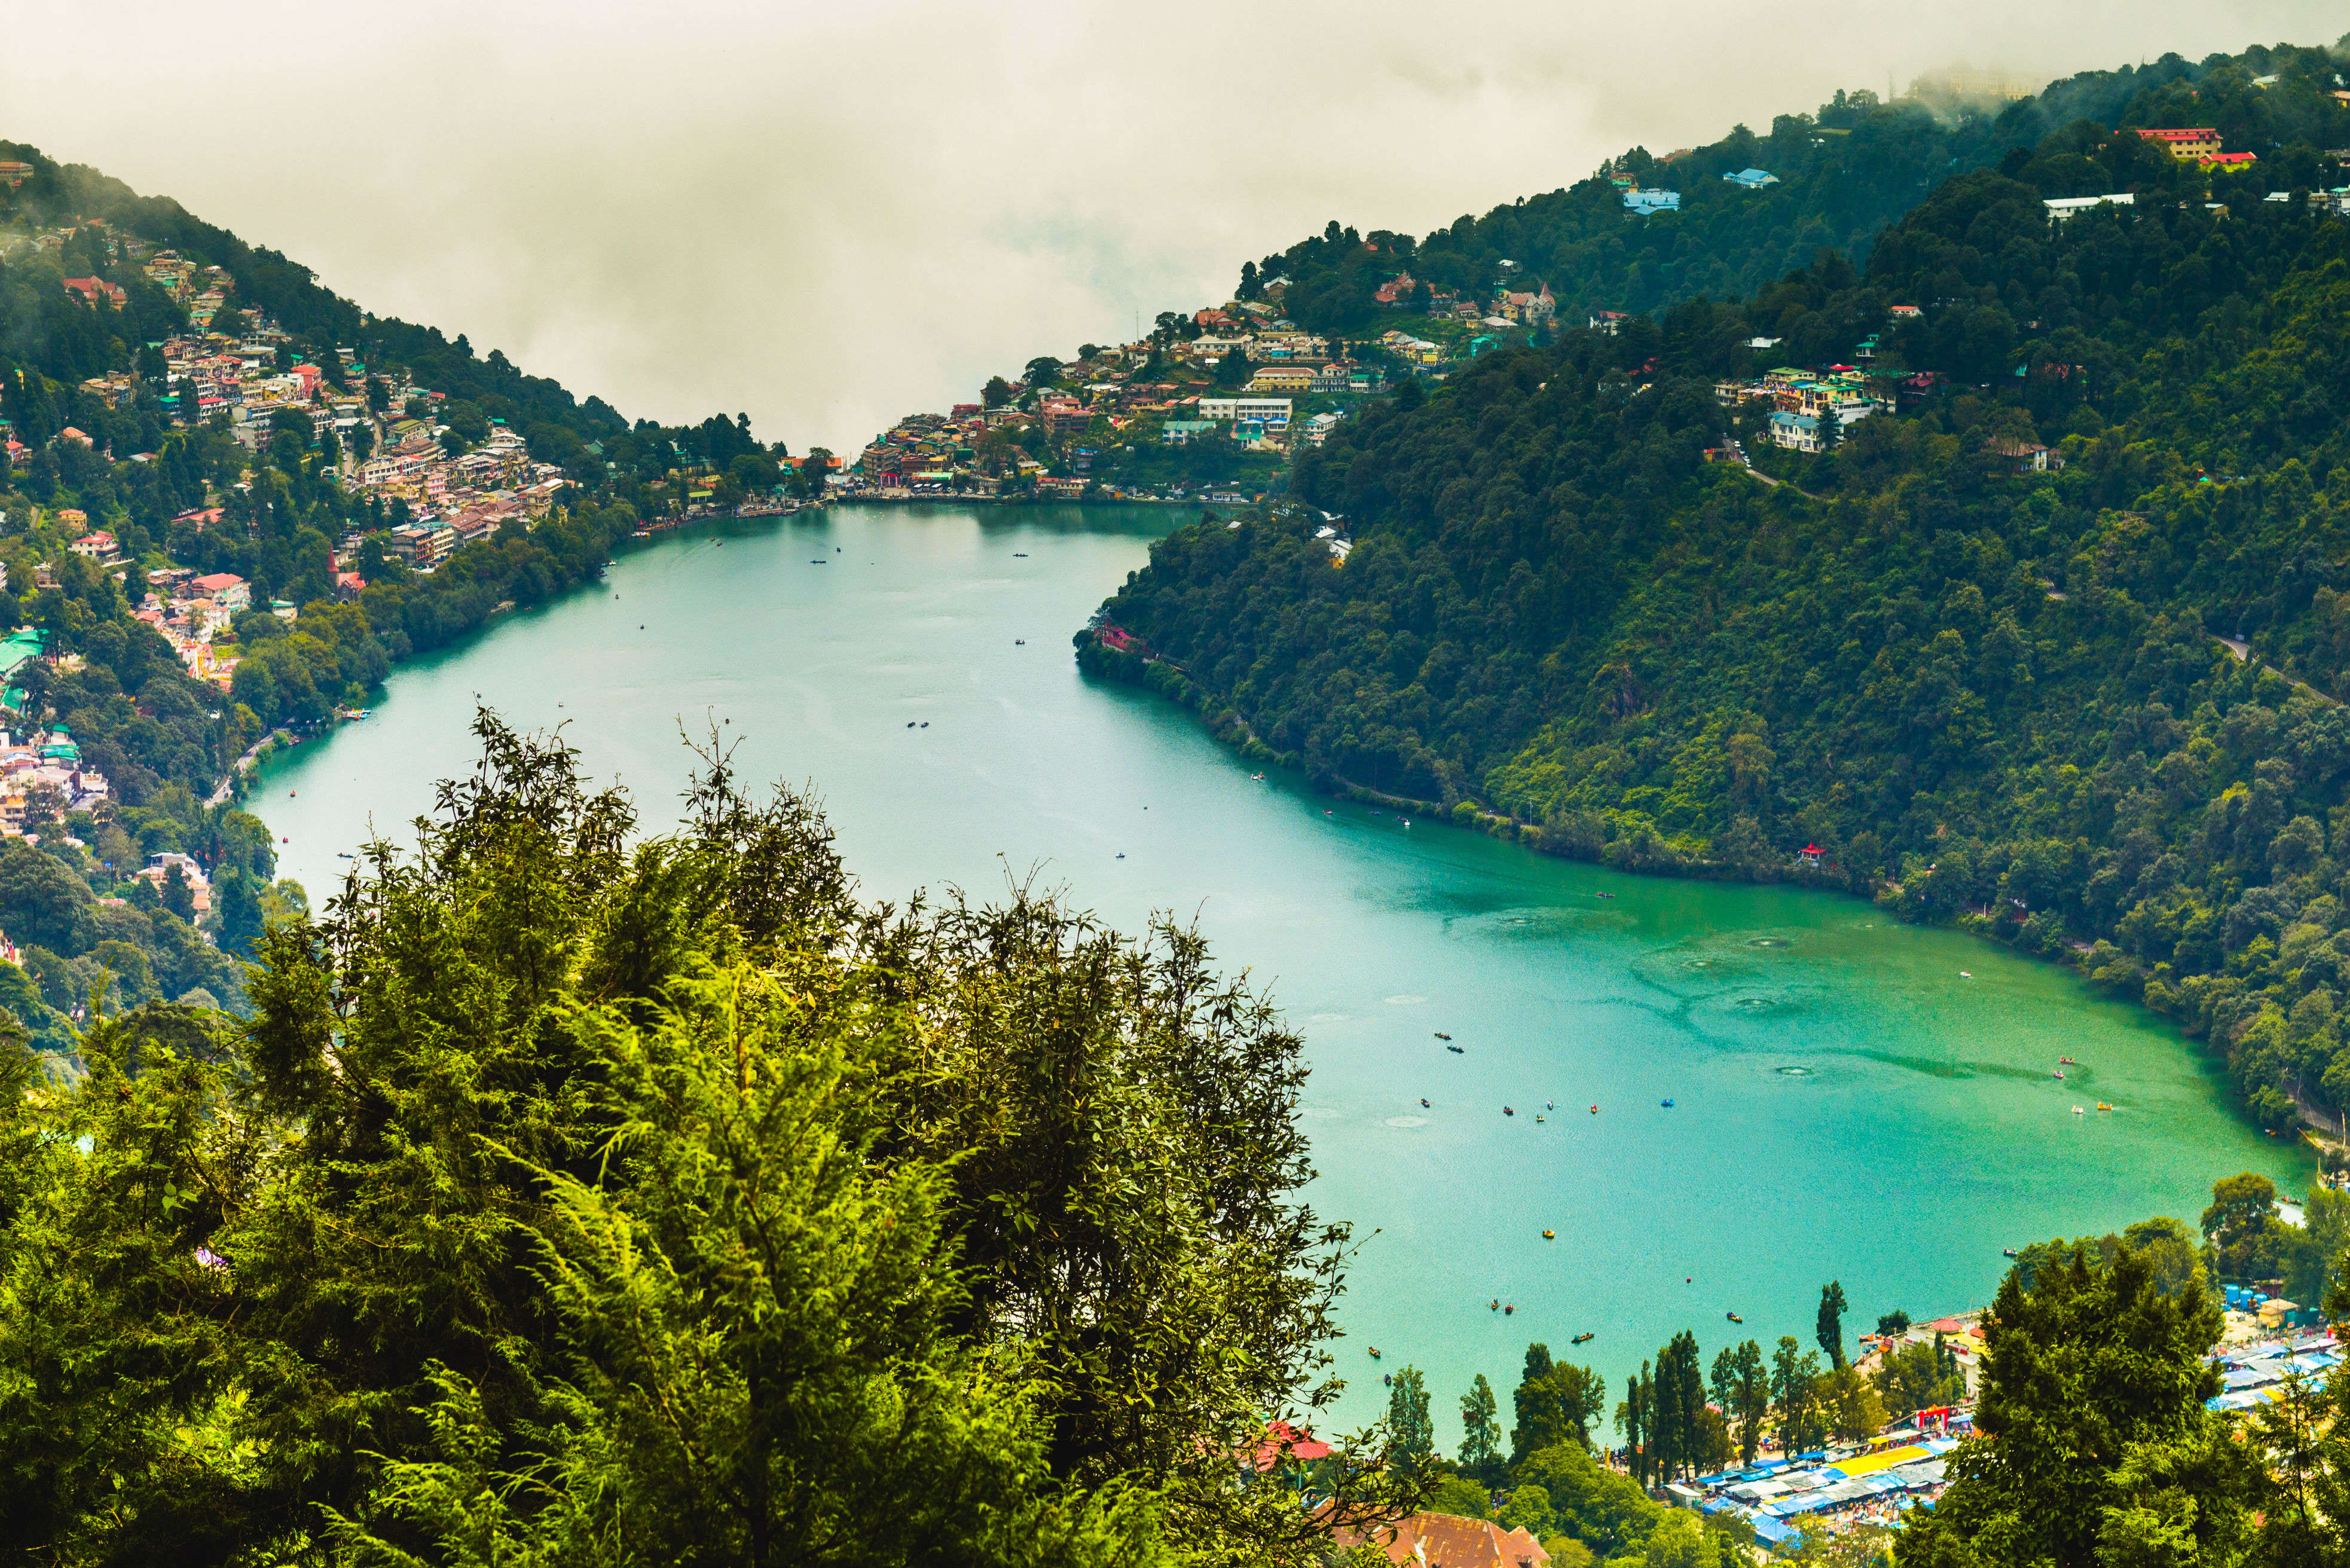 Is there bungee jumping in Nainital?